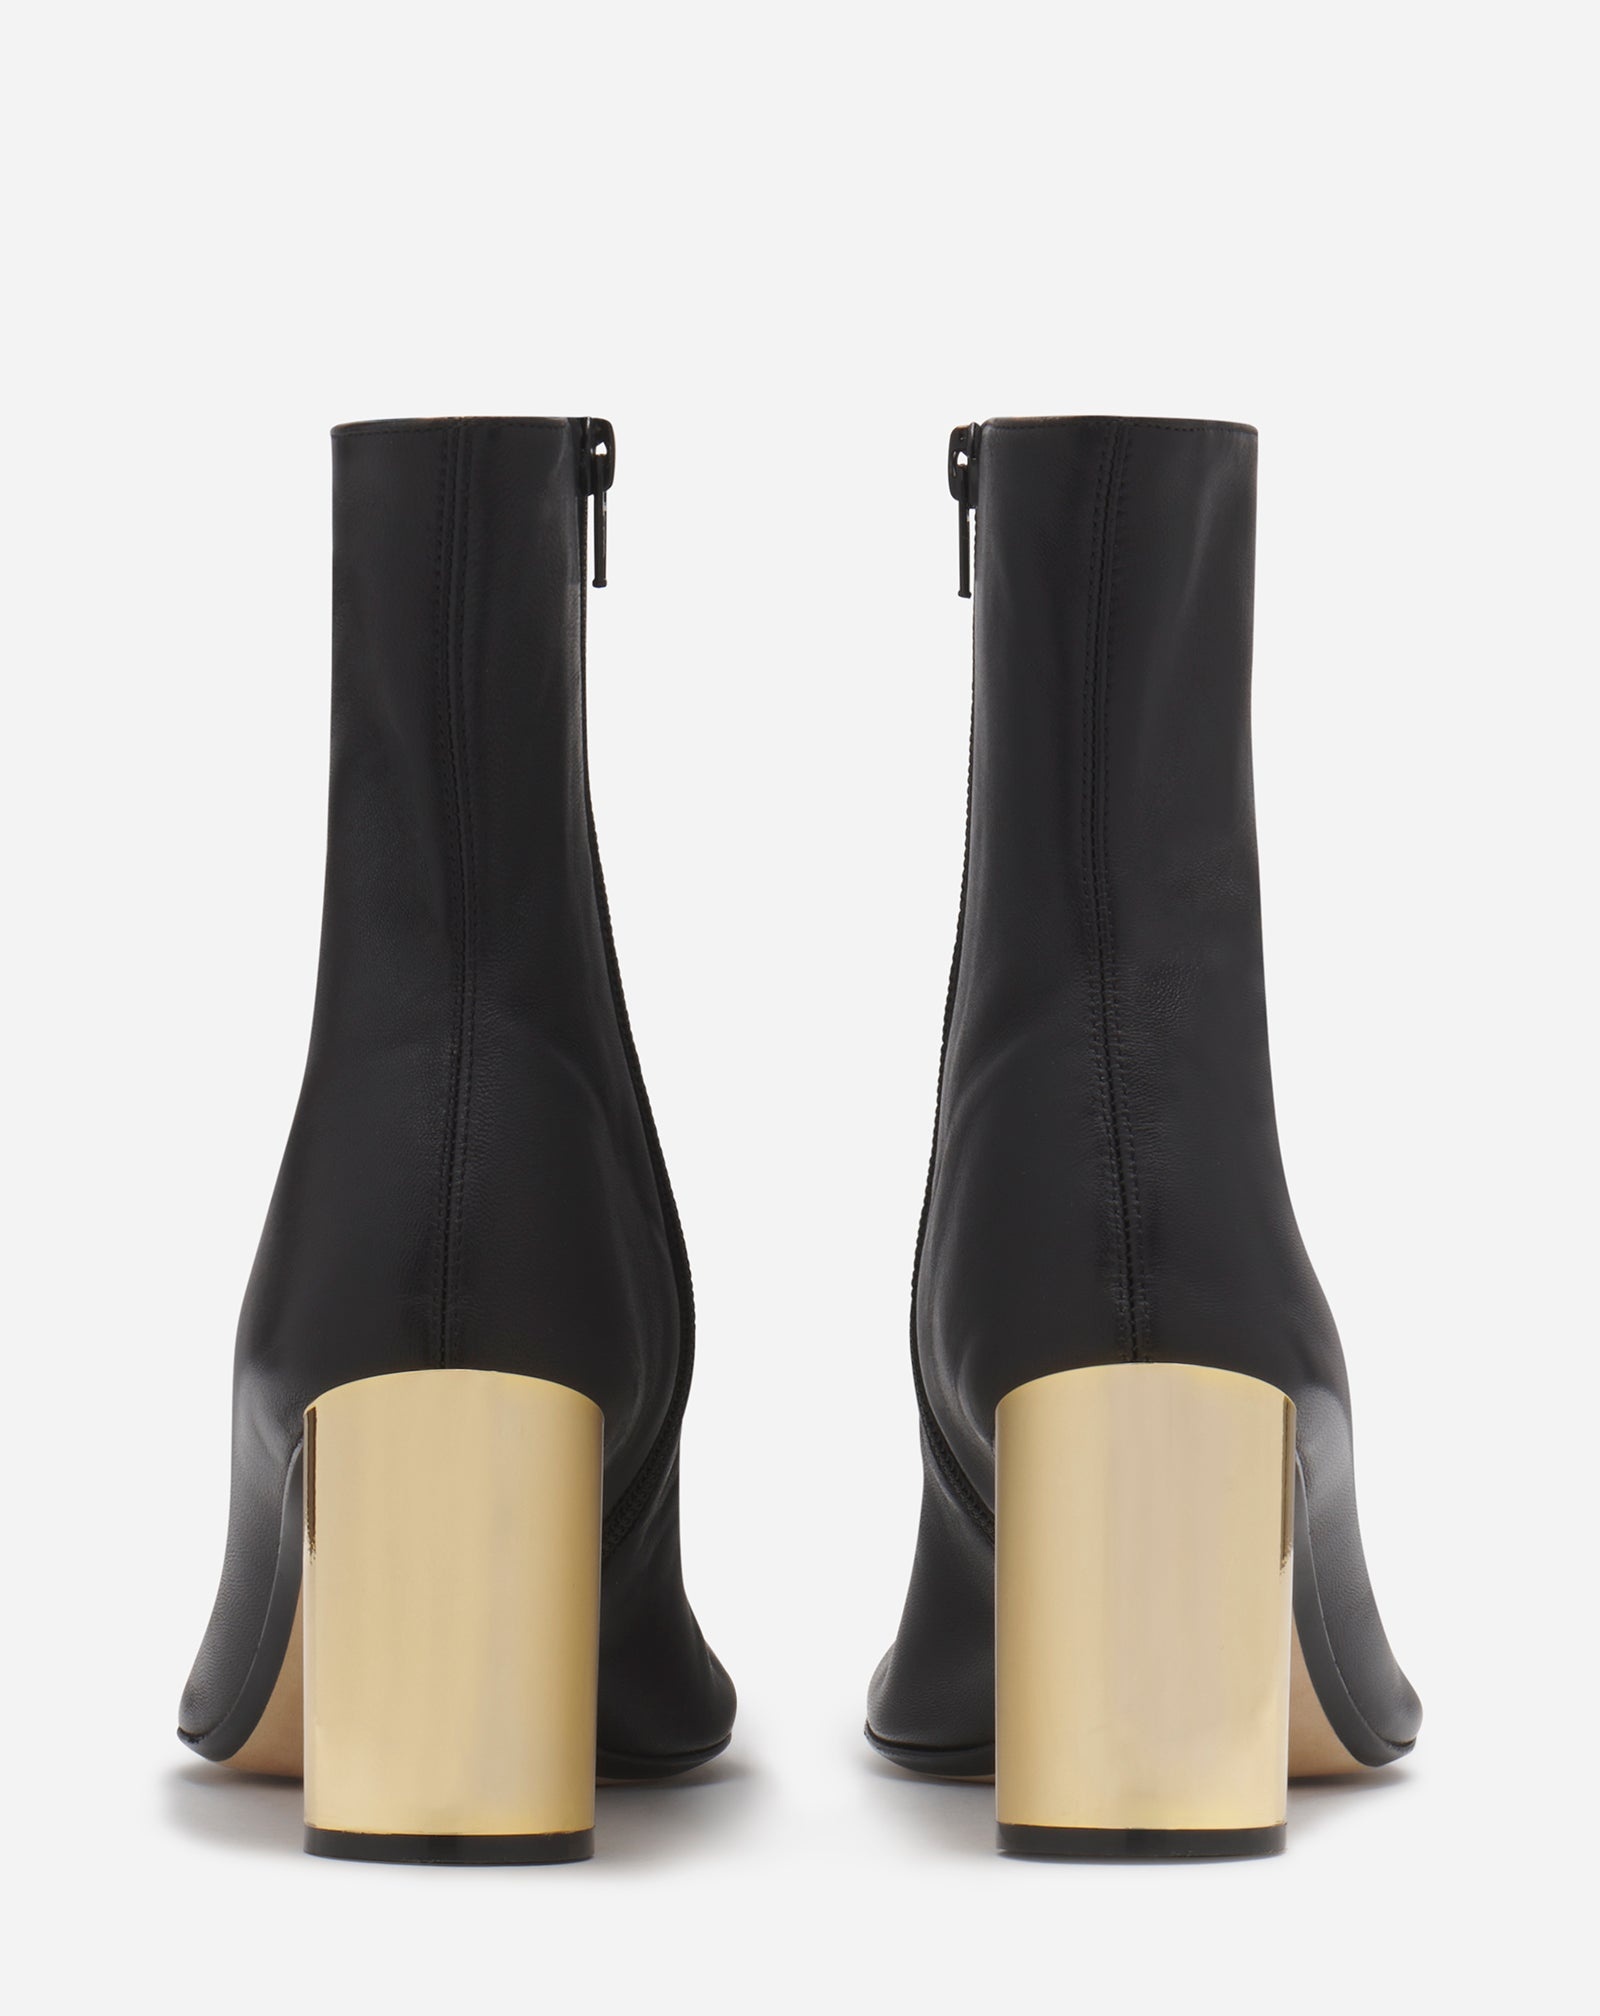 LEATHER SEQUENCE BY LANVIN CHUNKY HEELED BOOTS - 4